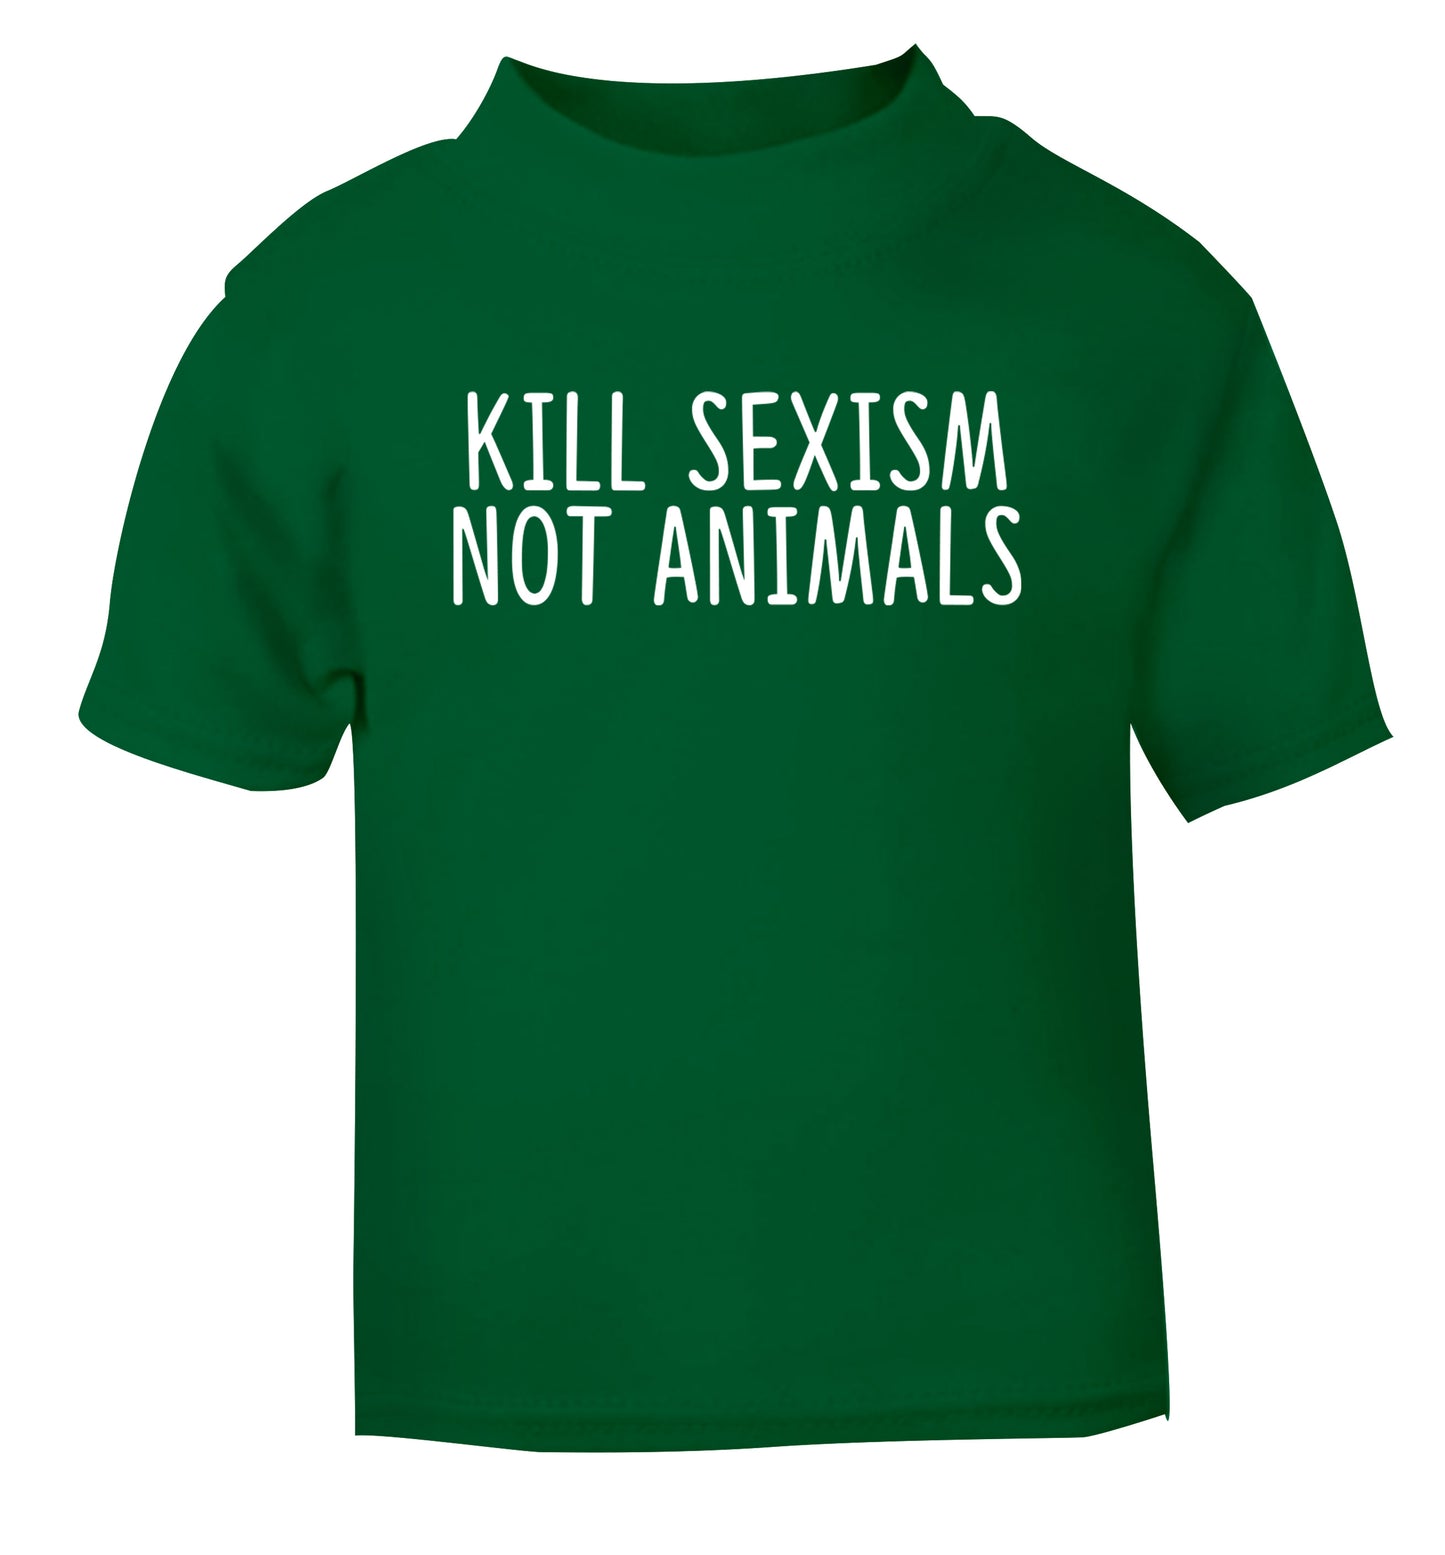 Kill Sexism Not Animals green Baby Toddler Tshirt 2 Years